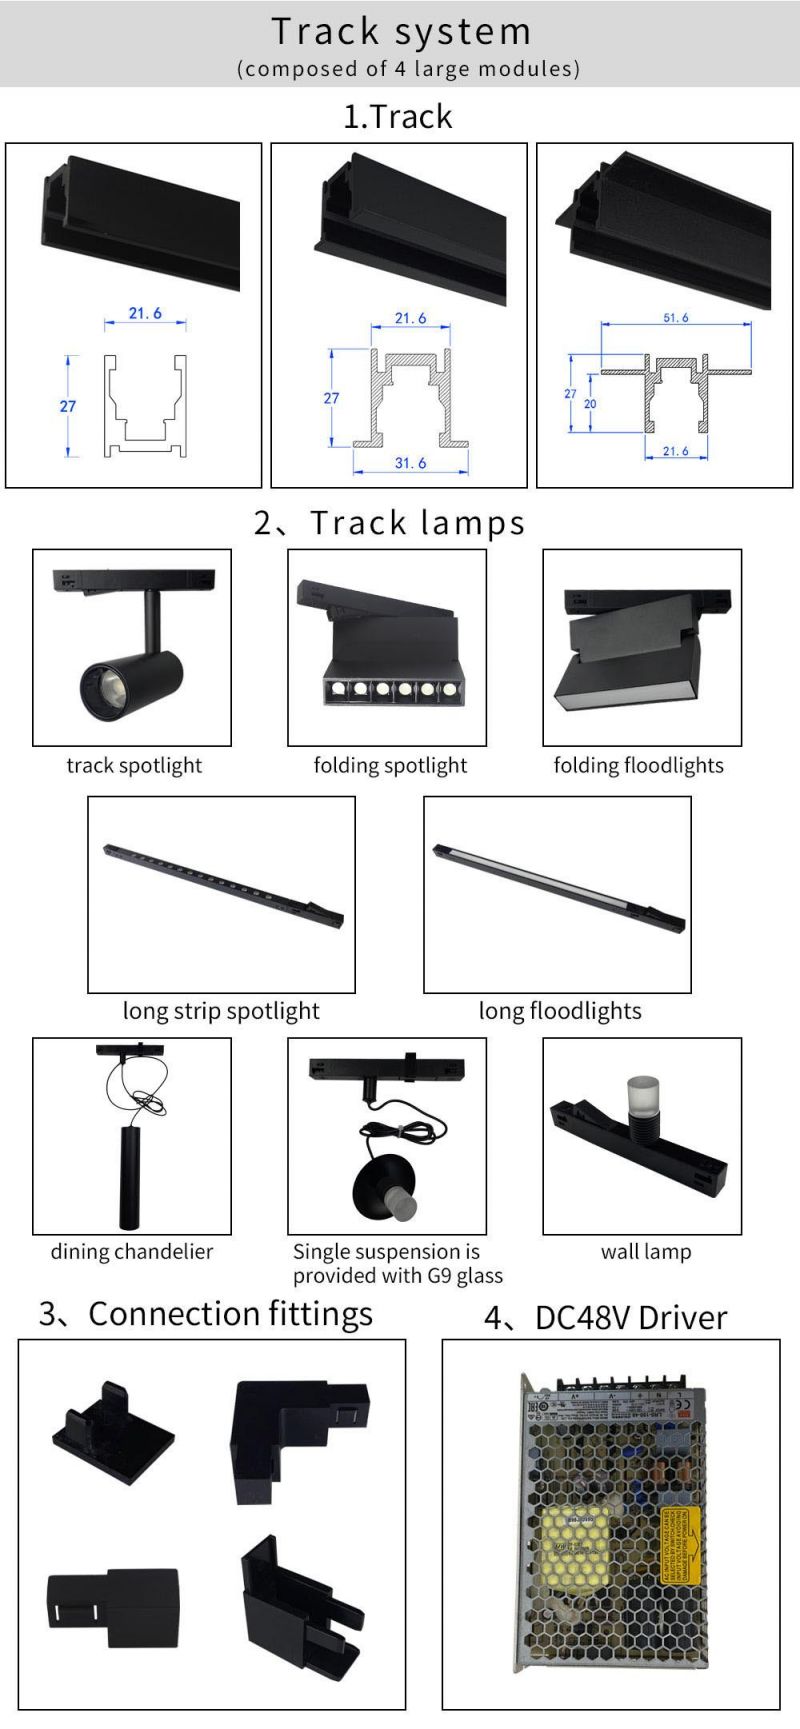 PRO Hot Sales Magnetic Track Light and Accessories for Plastic Aluminum Track Surface Hanging Recessed